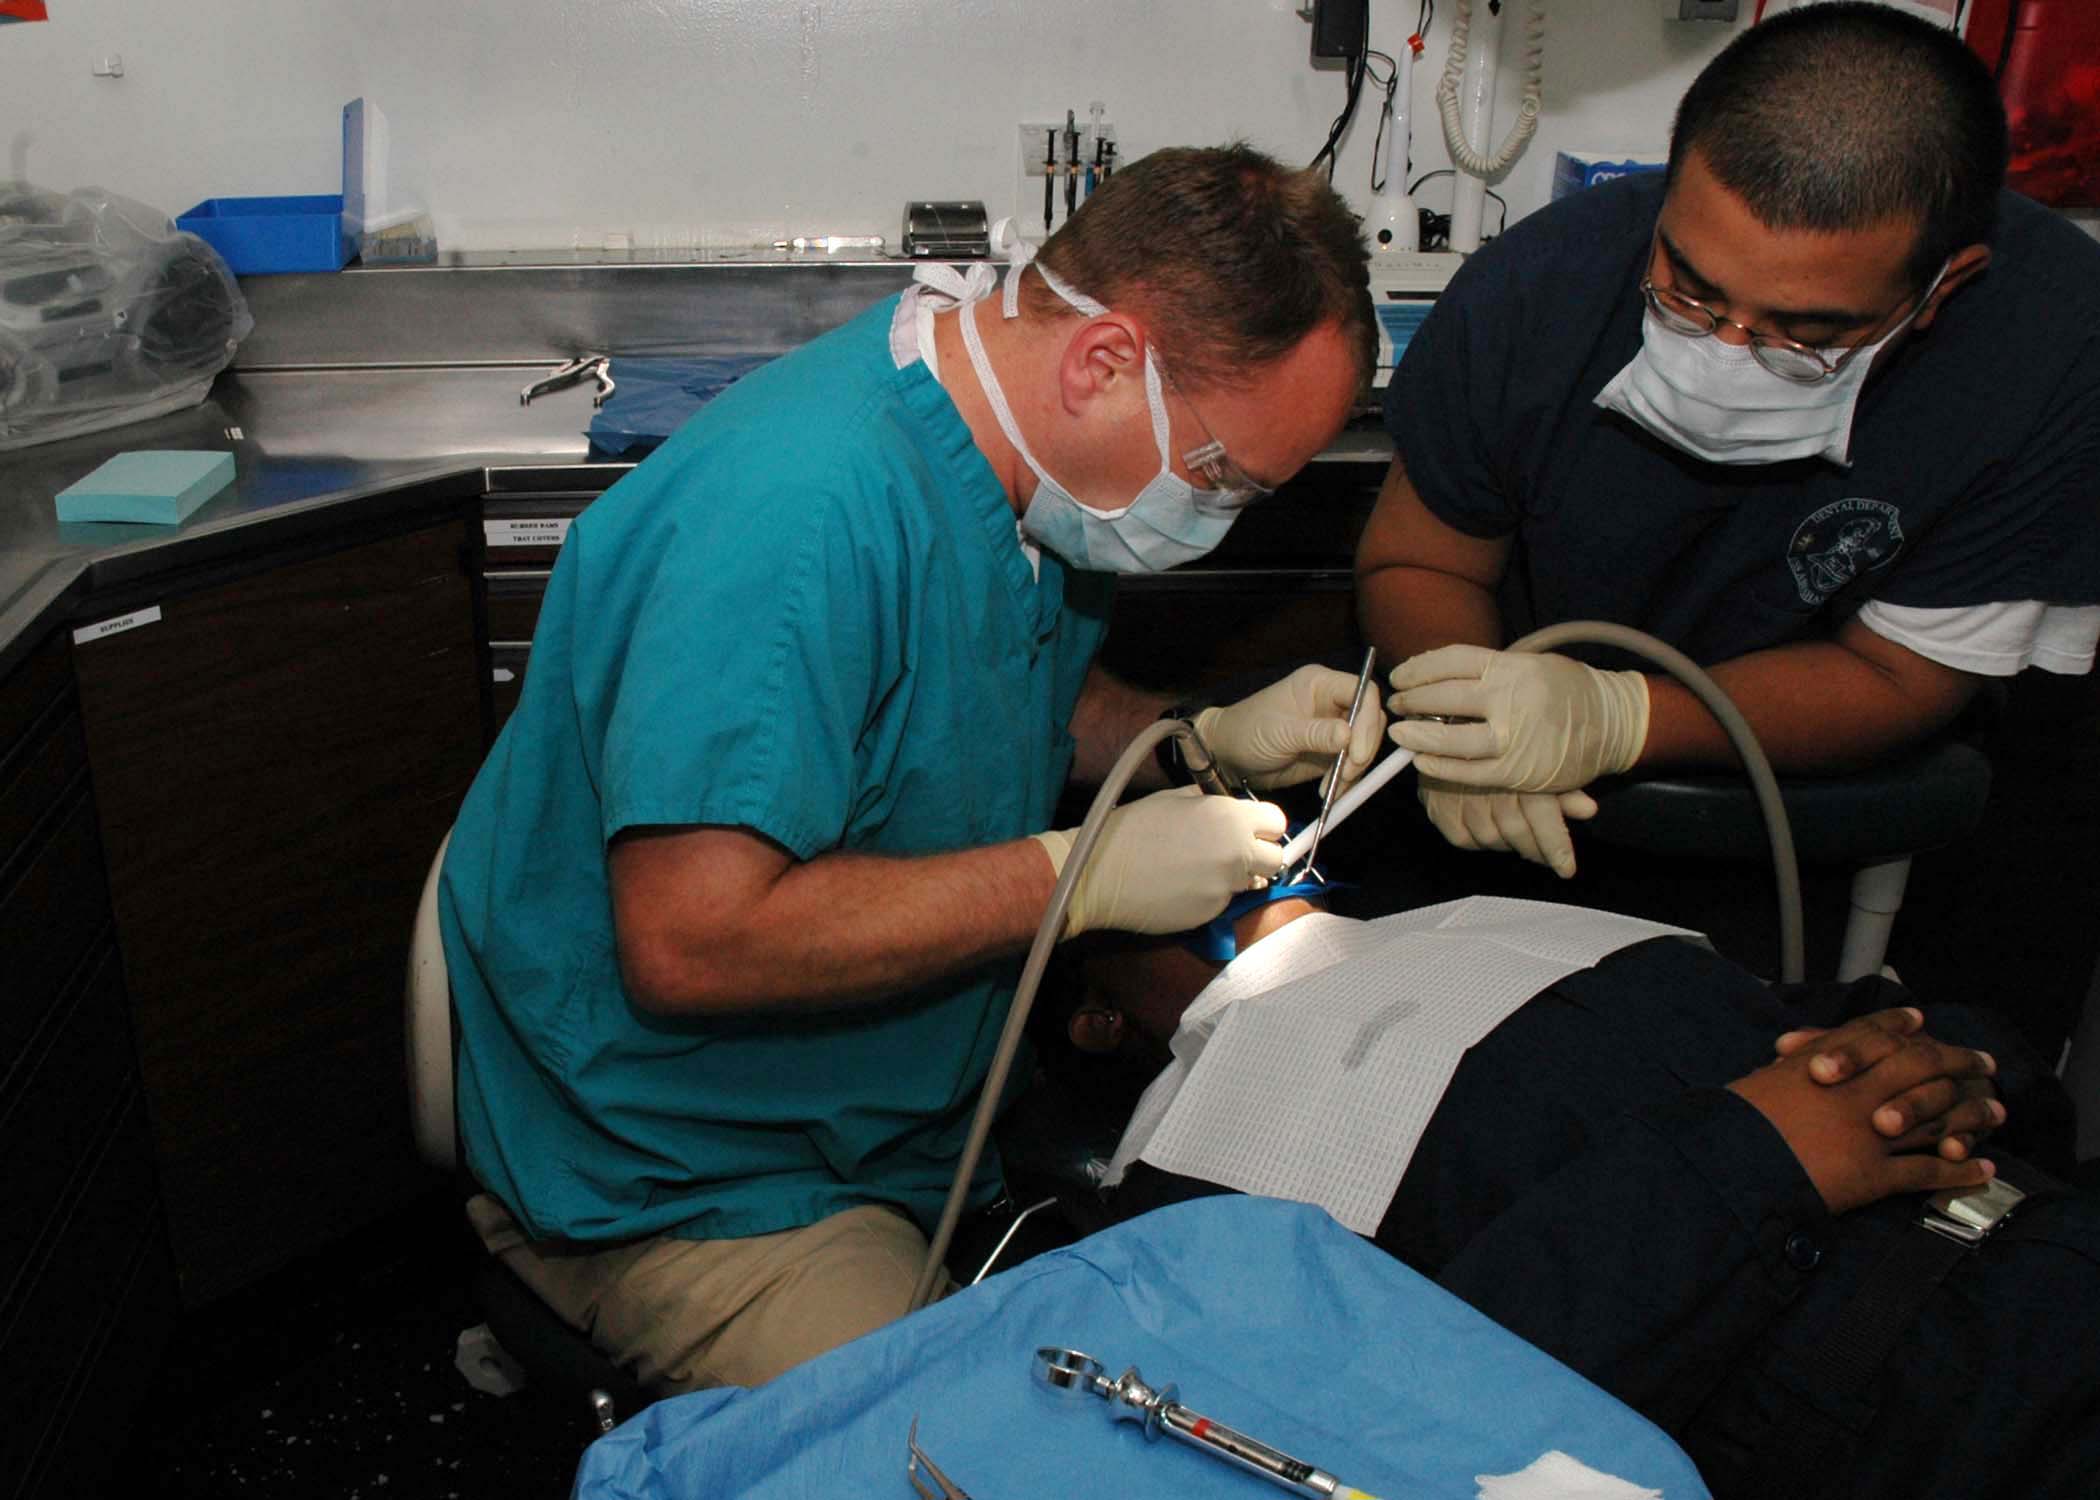 US Navy 050607-N-5837R-044 Lt. Mitch Paynter and Dental Technician 3rd Class Eddy Cardenas perform a filling operation on a patient